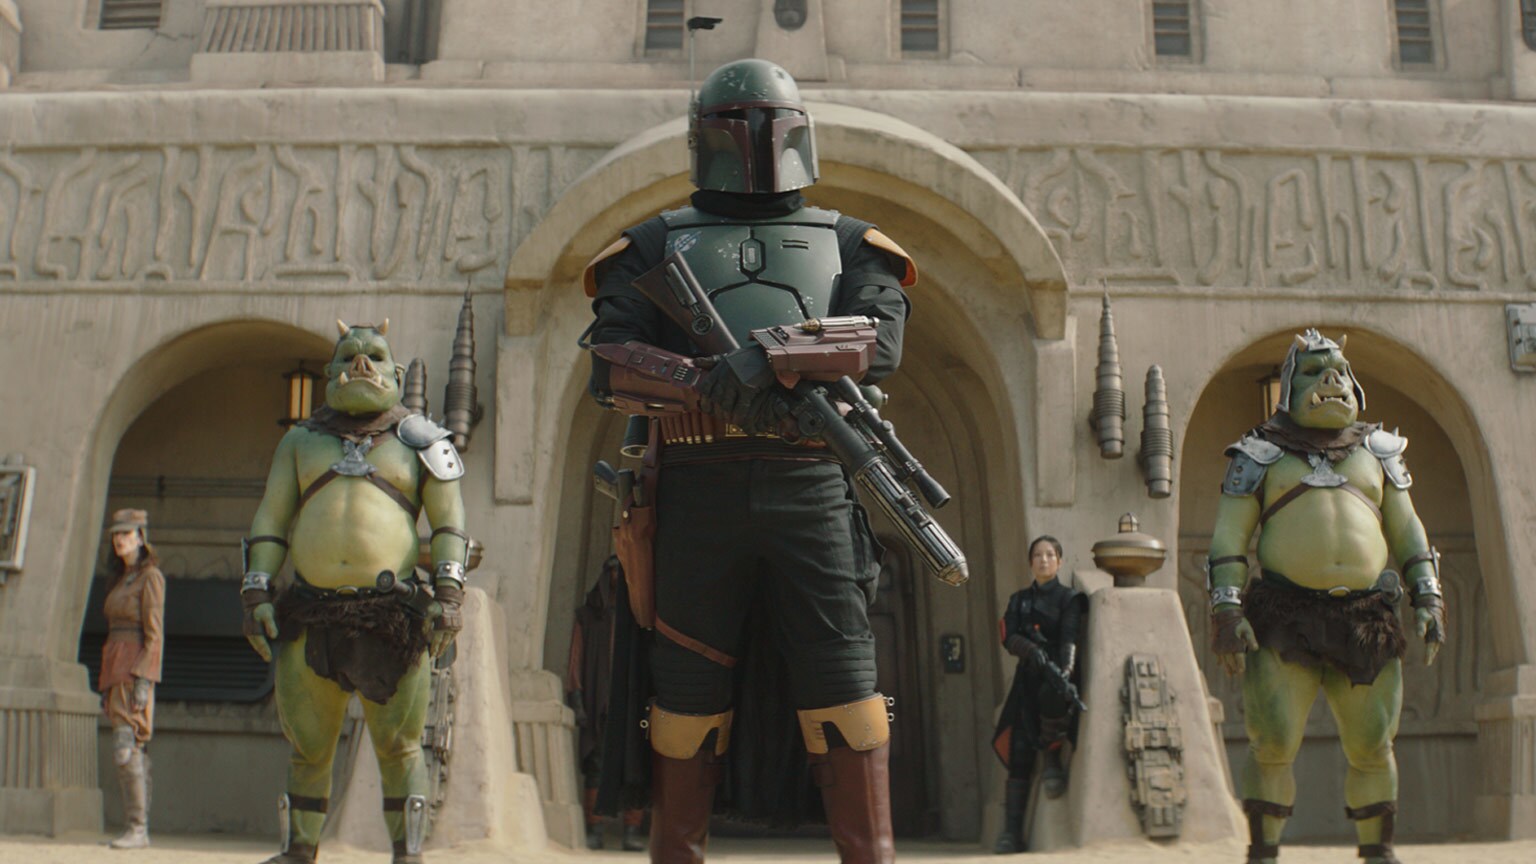 The Best of The Book of Boba Fett: 5 Highlights from “Chapter 2: The Tribes of Tatooine”